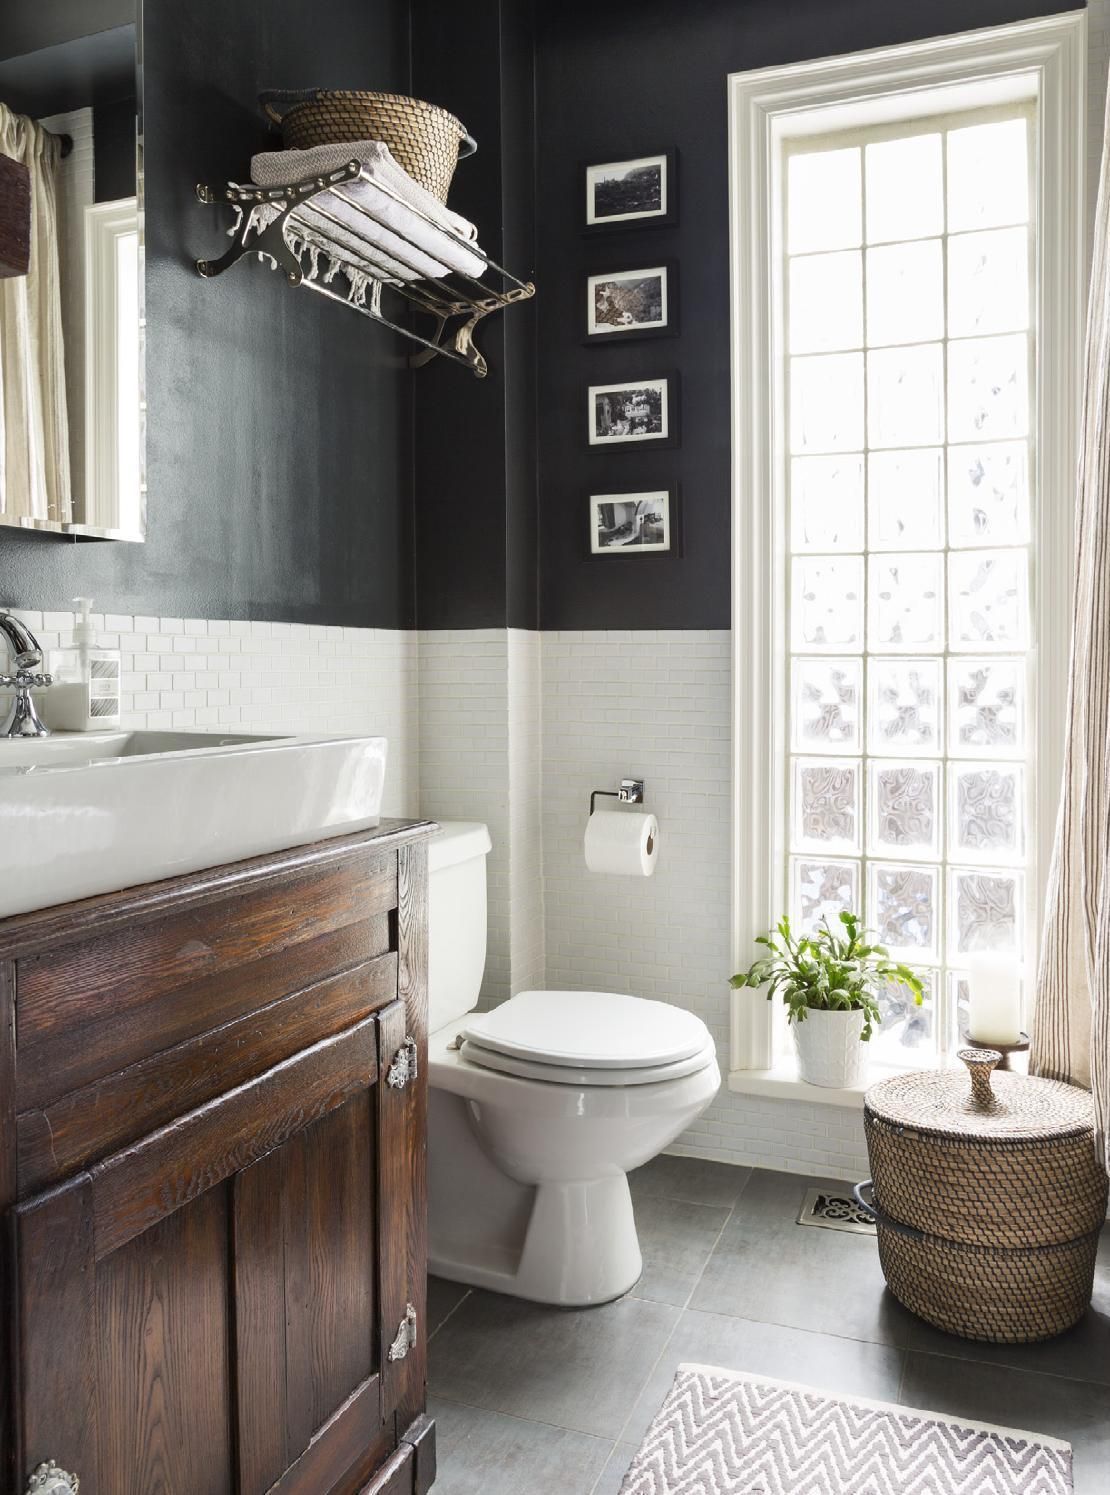 Awesome bathroom effect: black and white wall with dark floor and vanity cabinet